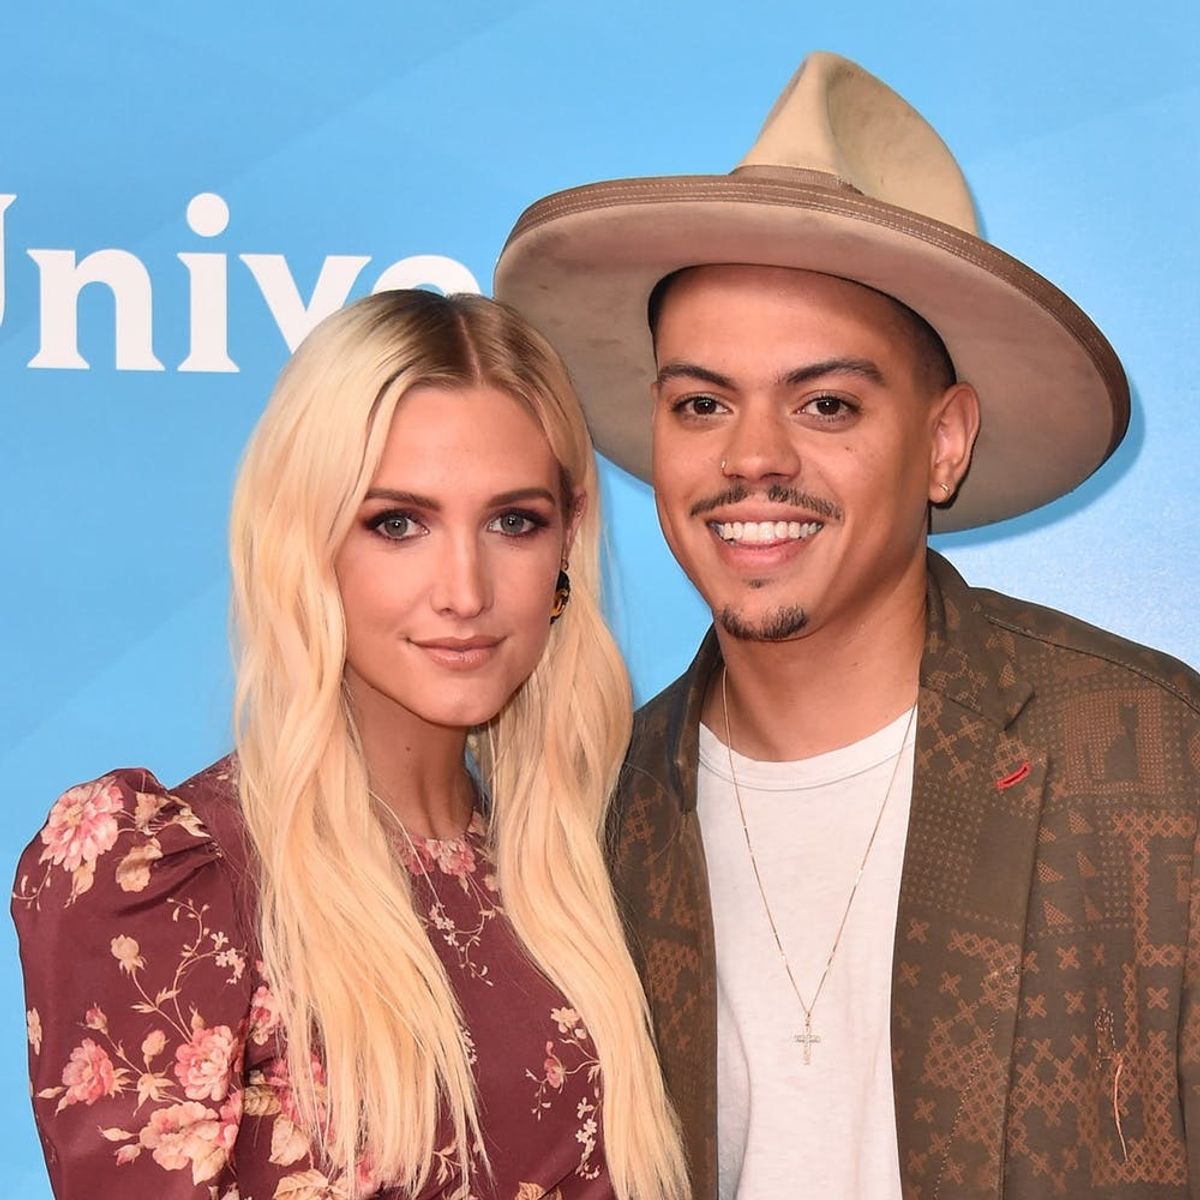 Here’s How Evan Ross *Really* Feels About His Wife’s Reality Show Past